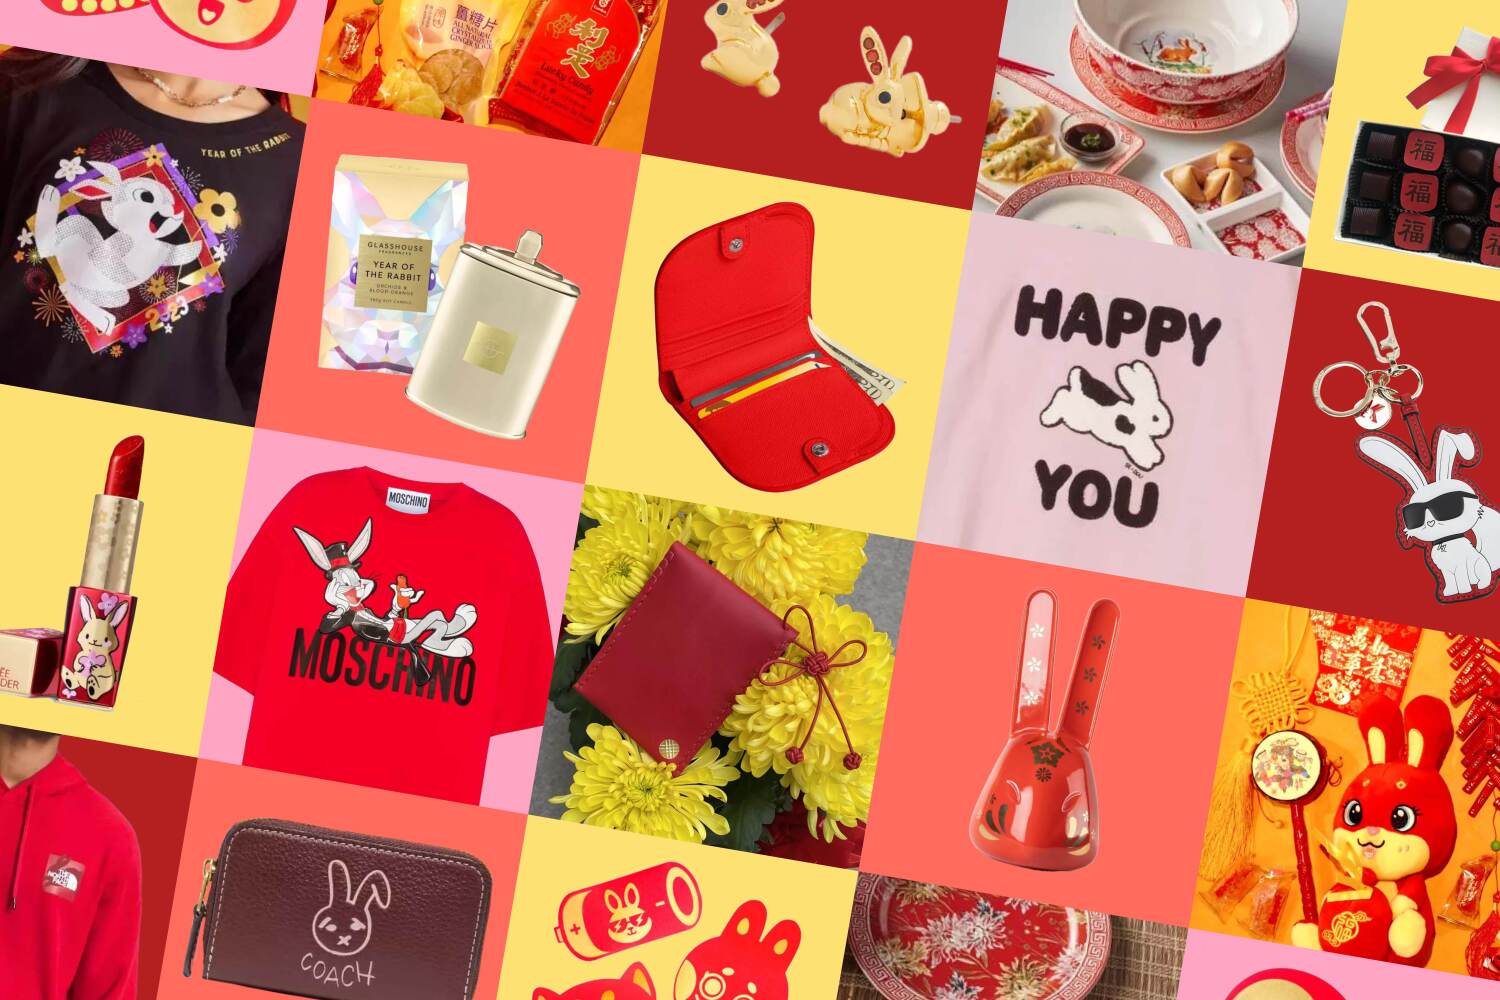 Hop into the Year of the Rabbit with 17 fun Lunar New Year finds